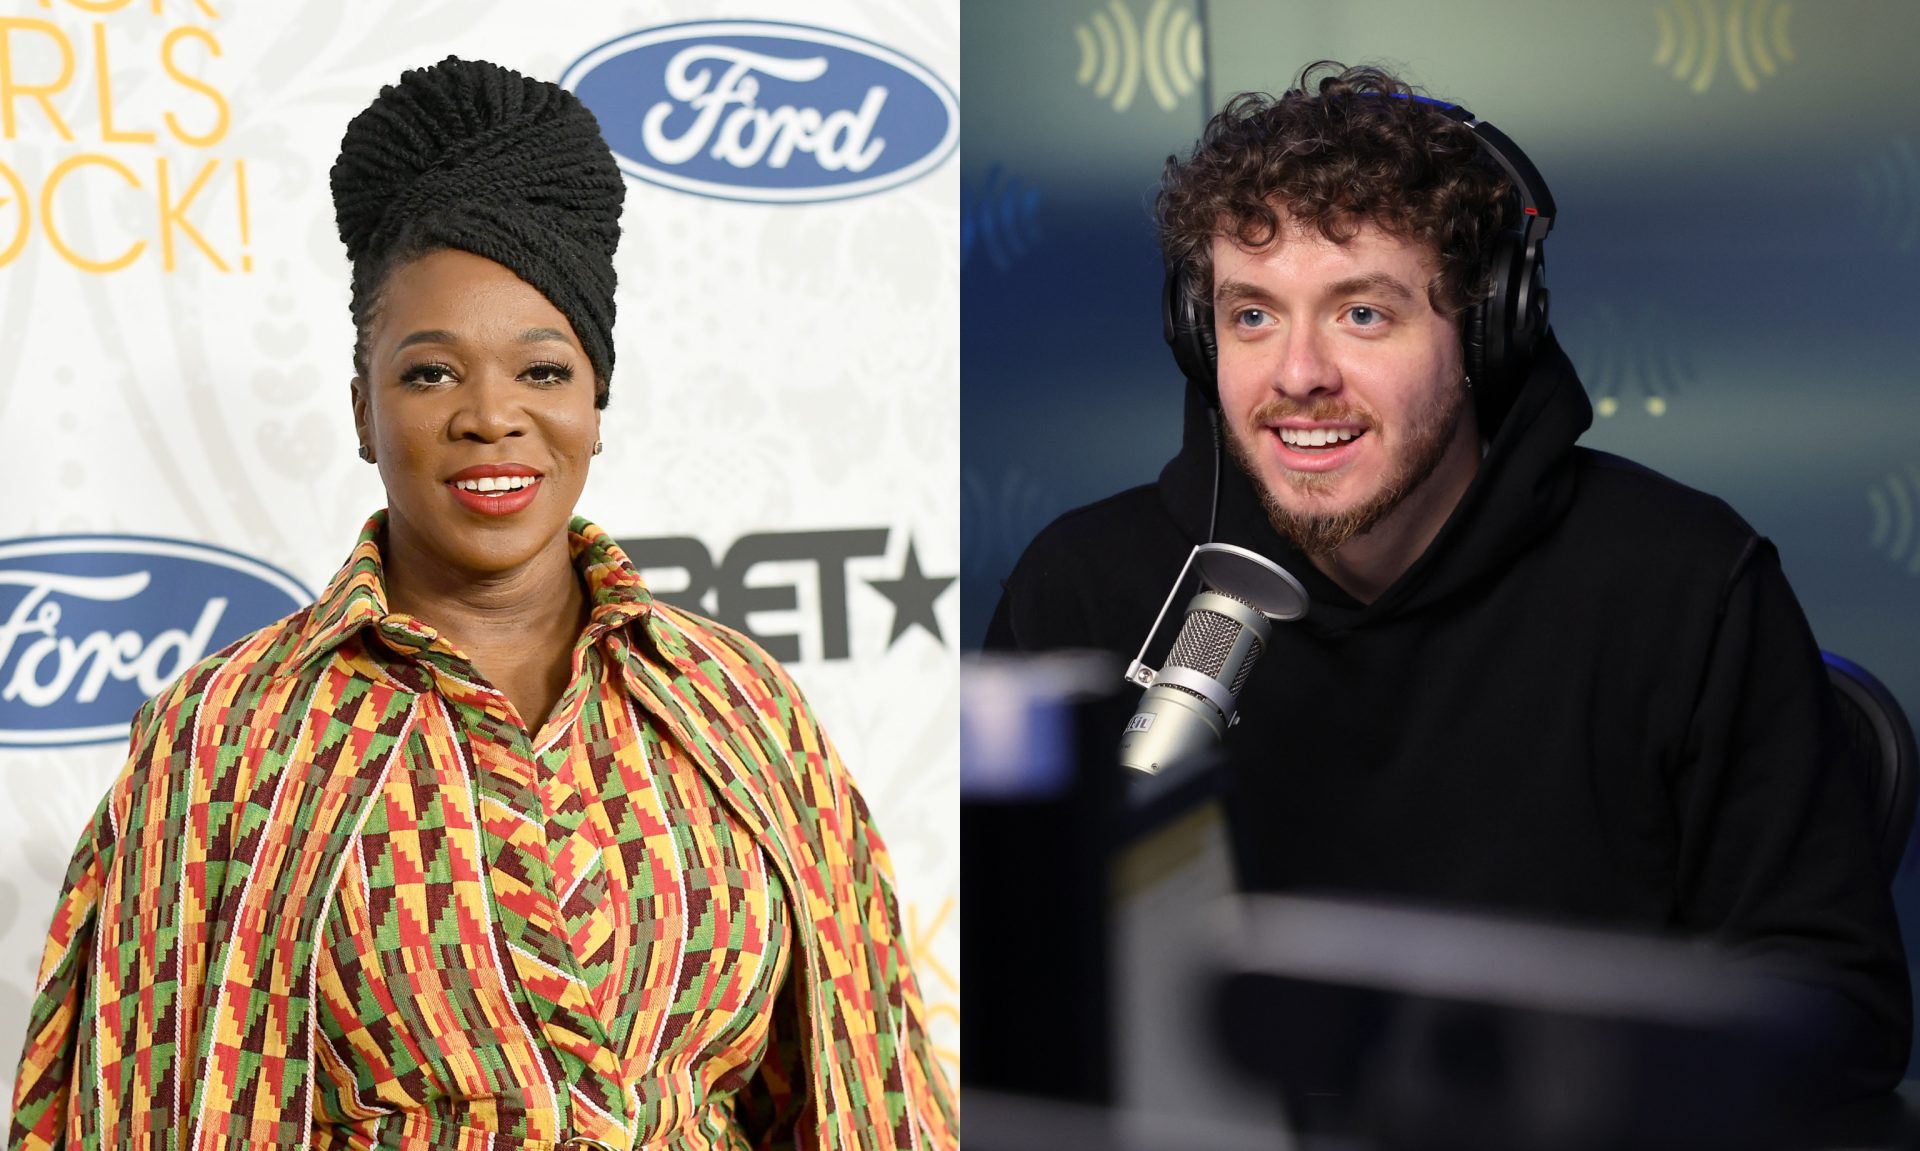 India Arie and Jack Harlow